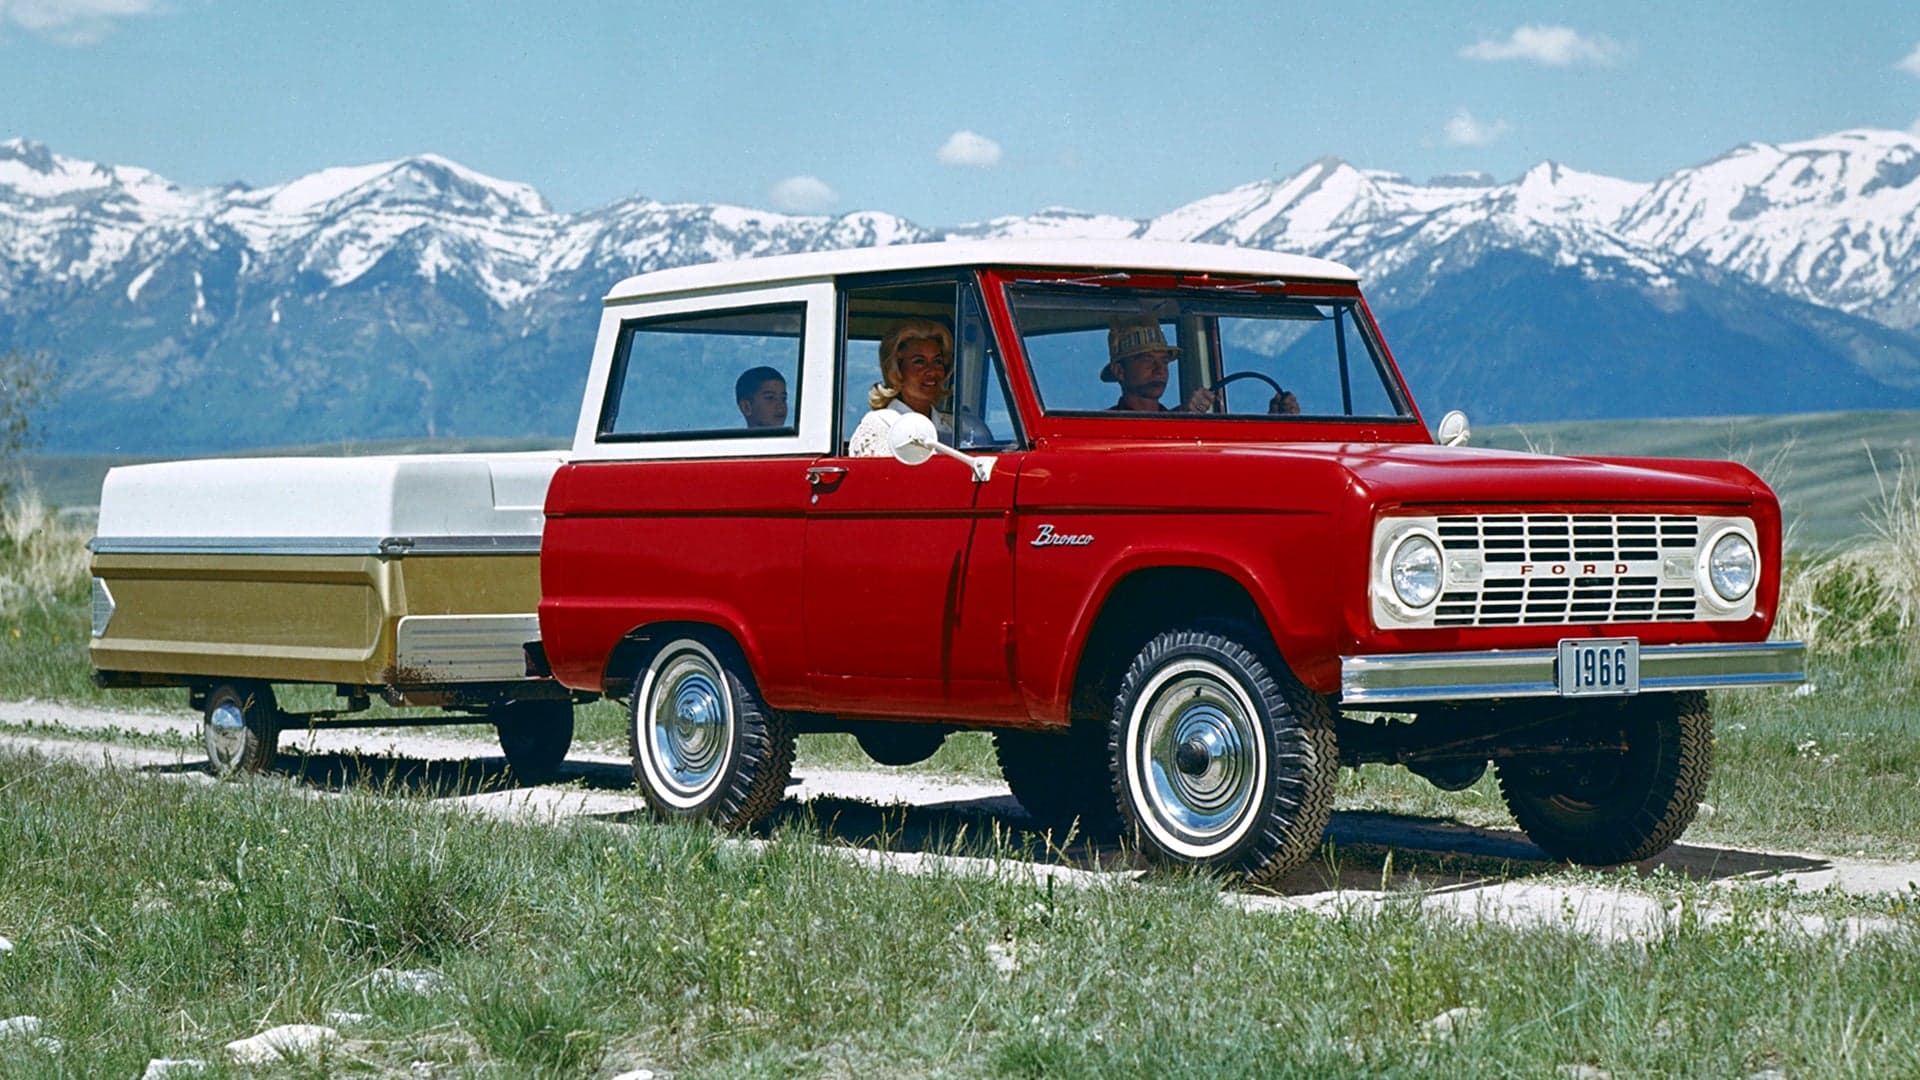 The First Ford Bronco Was Almost Named the Ford Wrangler